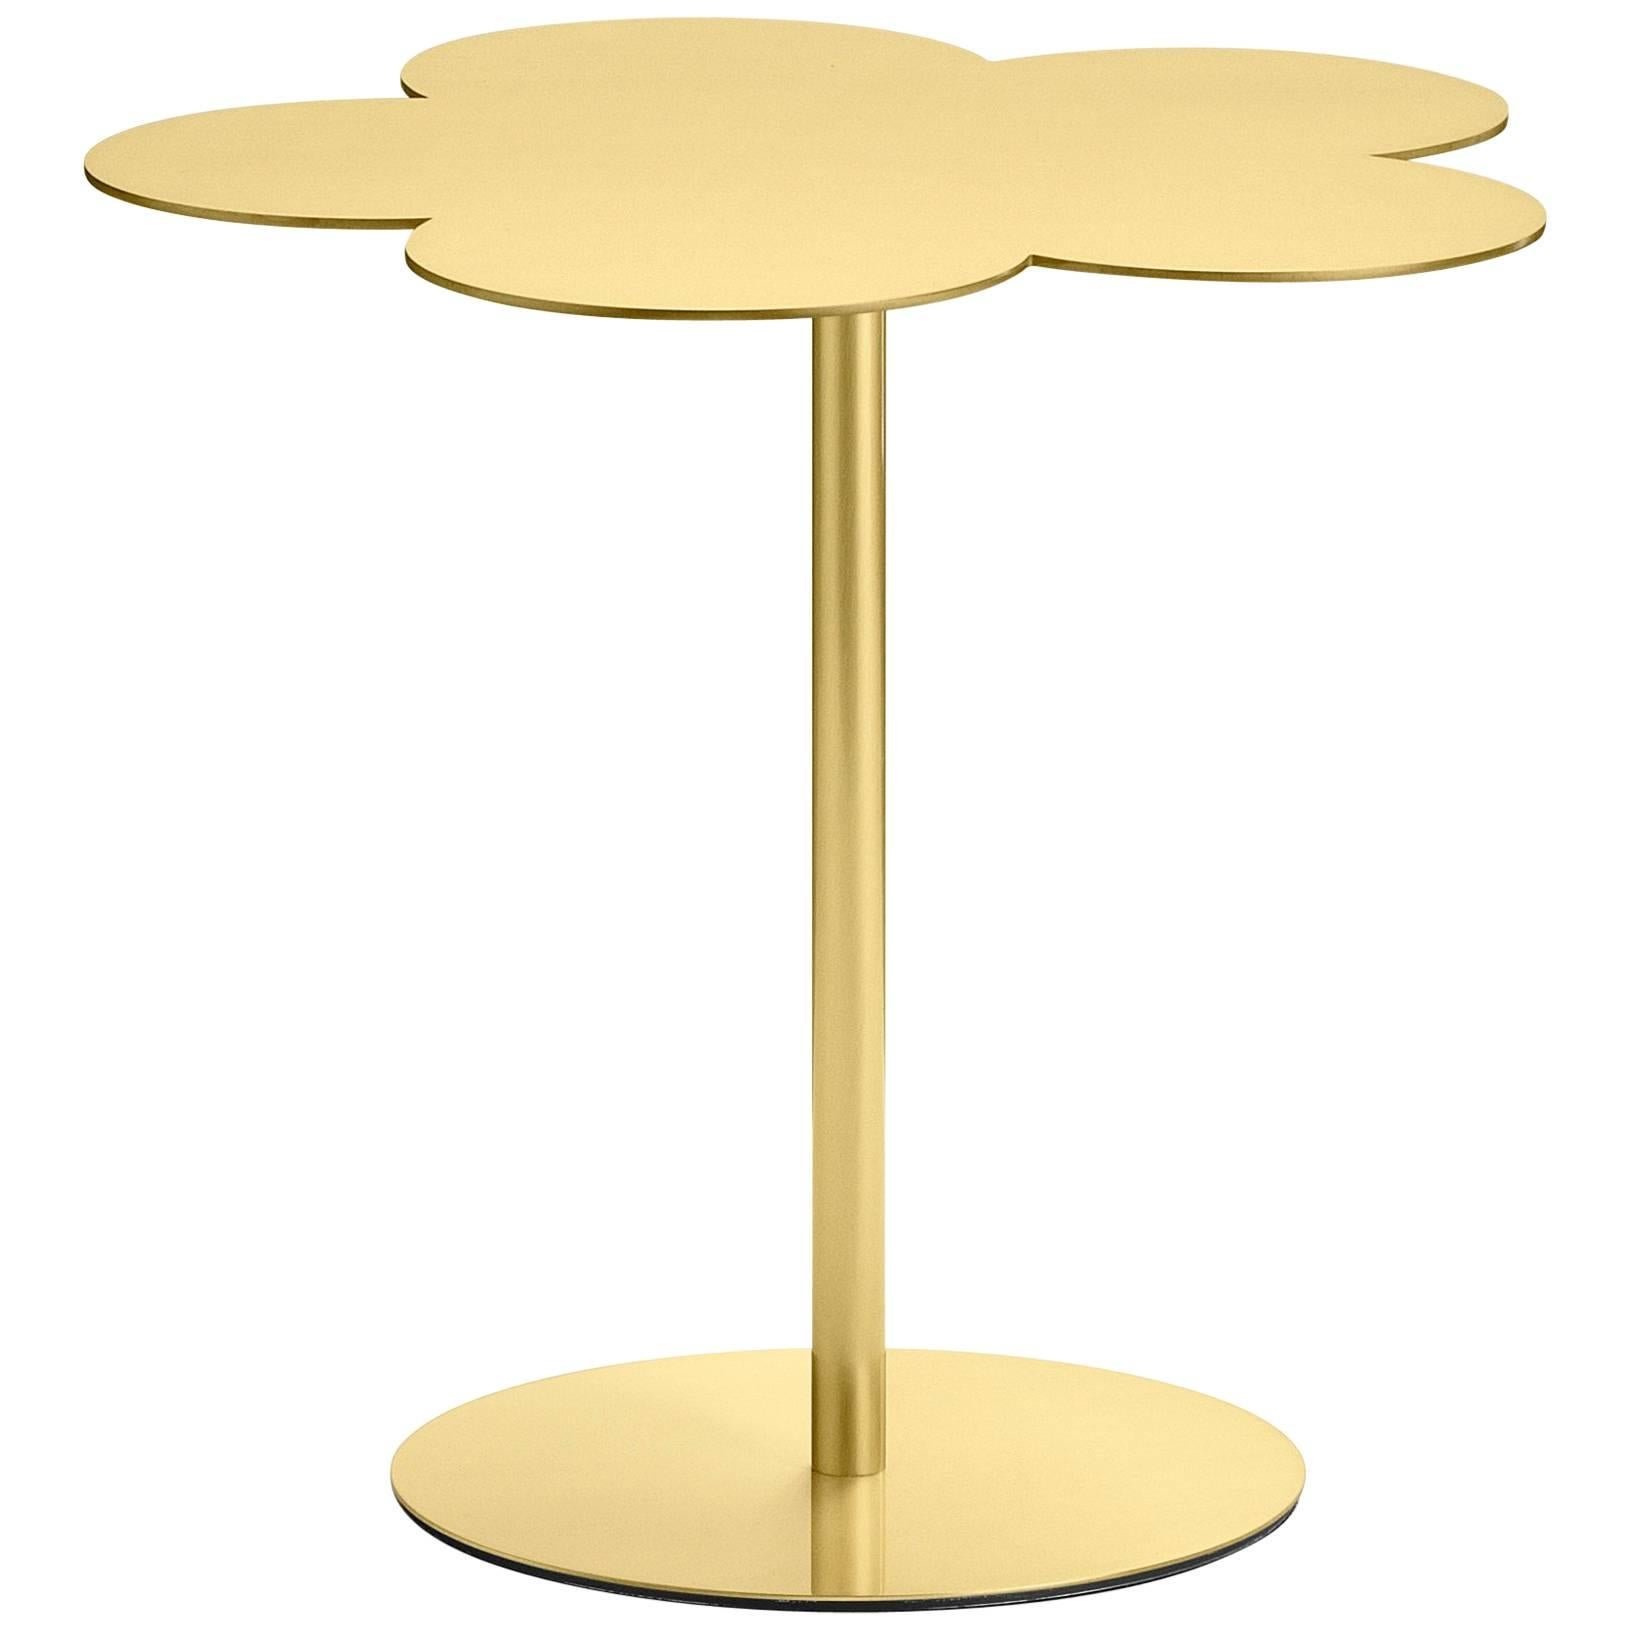 Ghidini 1961 Flowers Medium Side Coffee Table in Satin Brass Finish For Sale